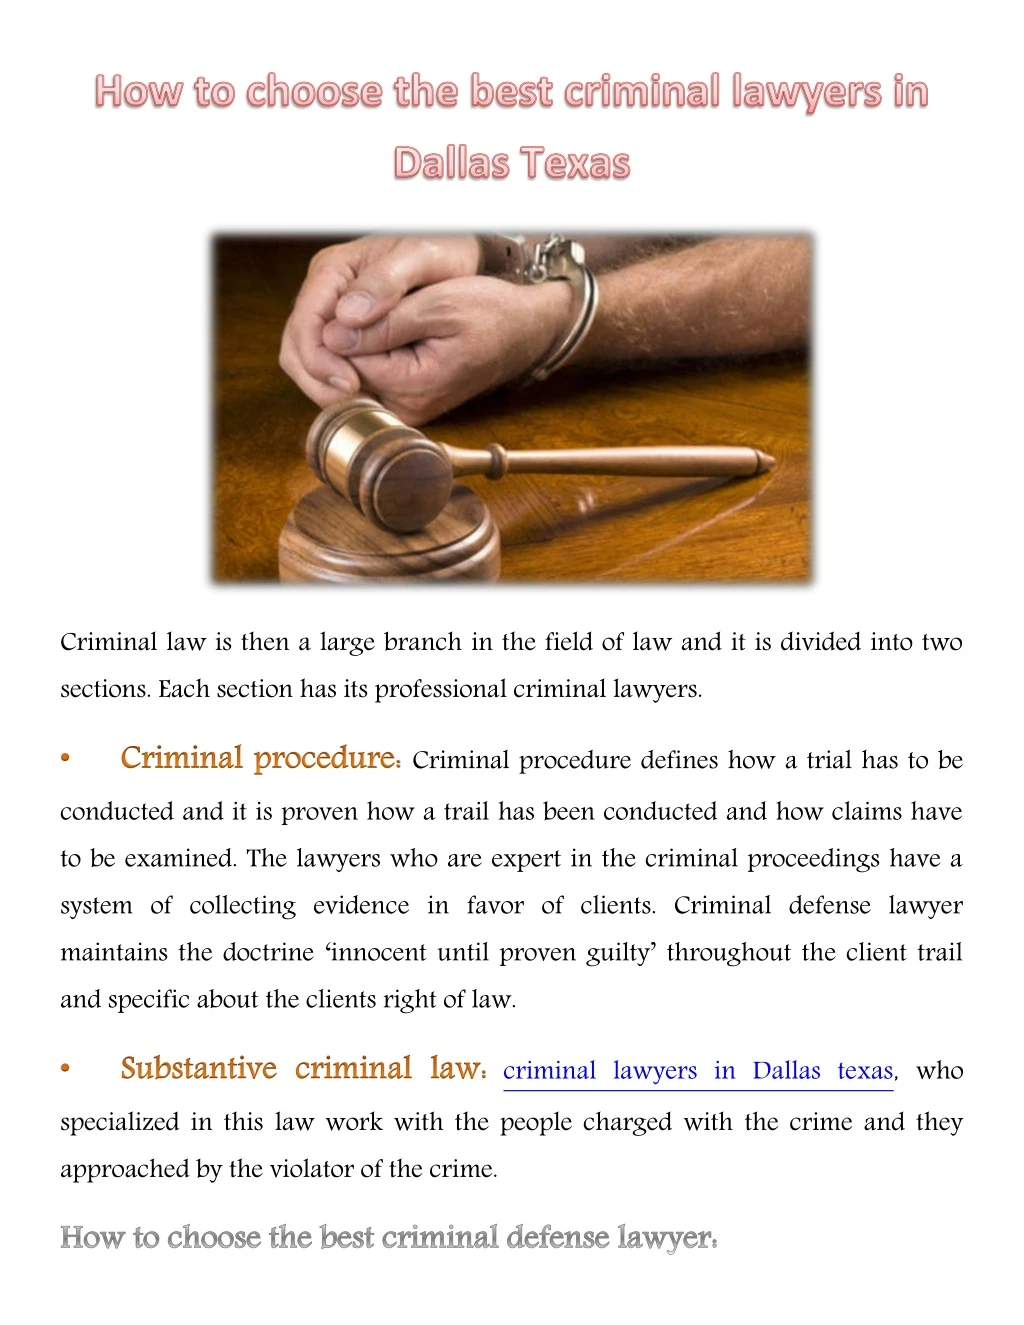 criminal law is then a large branch in the field